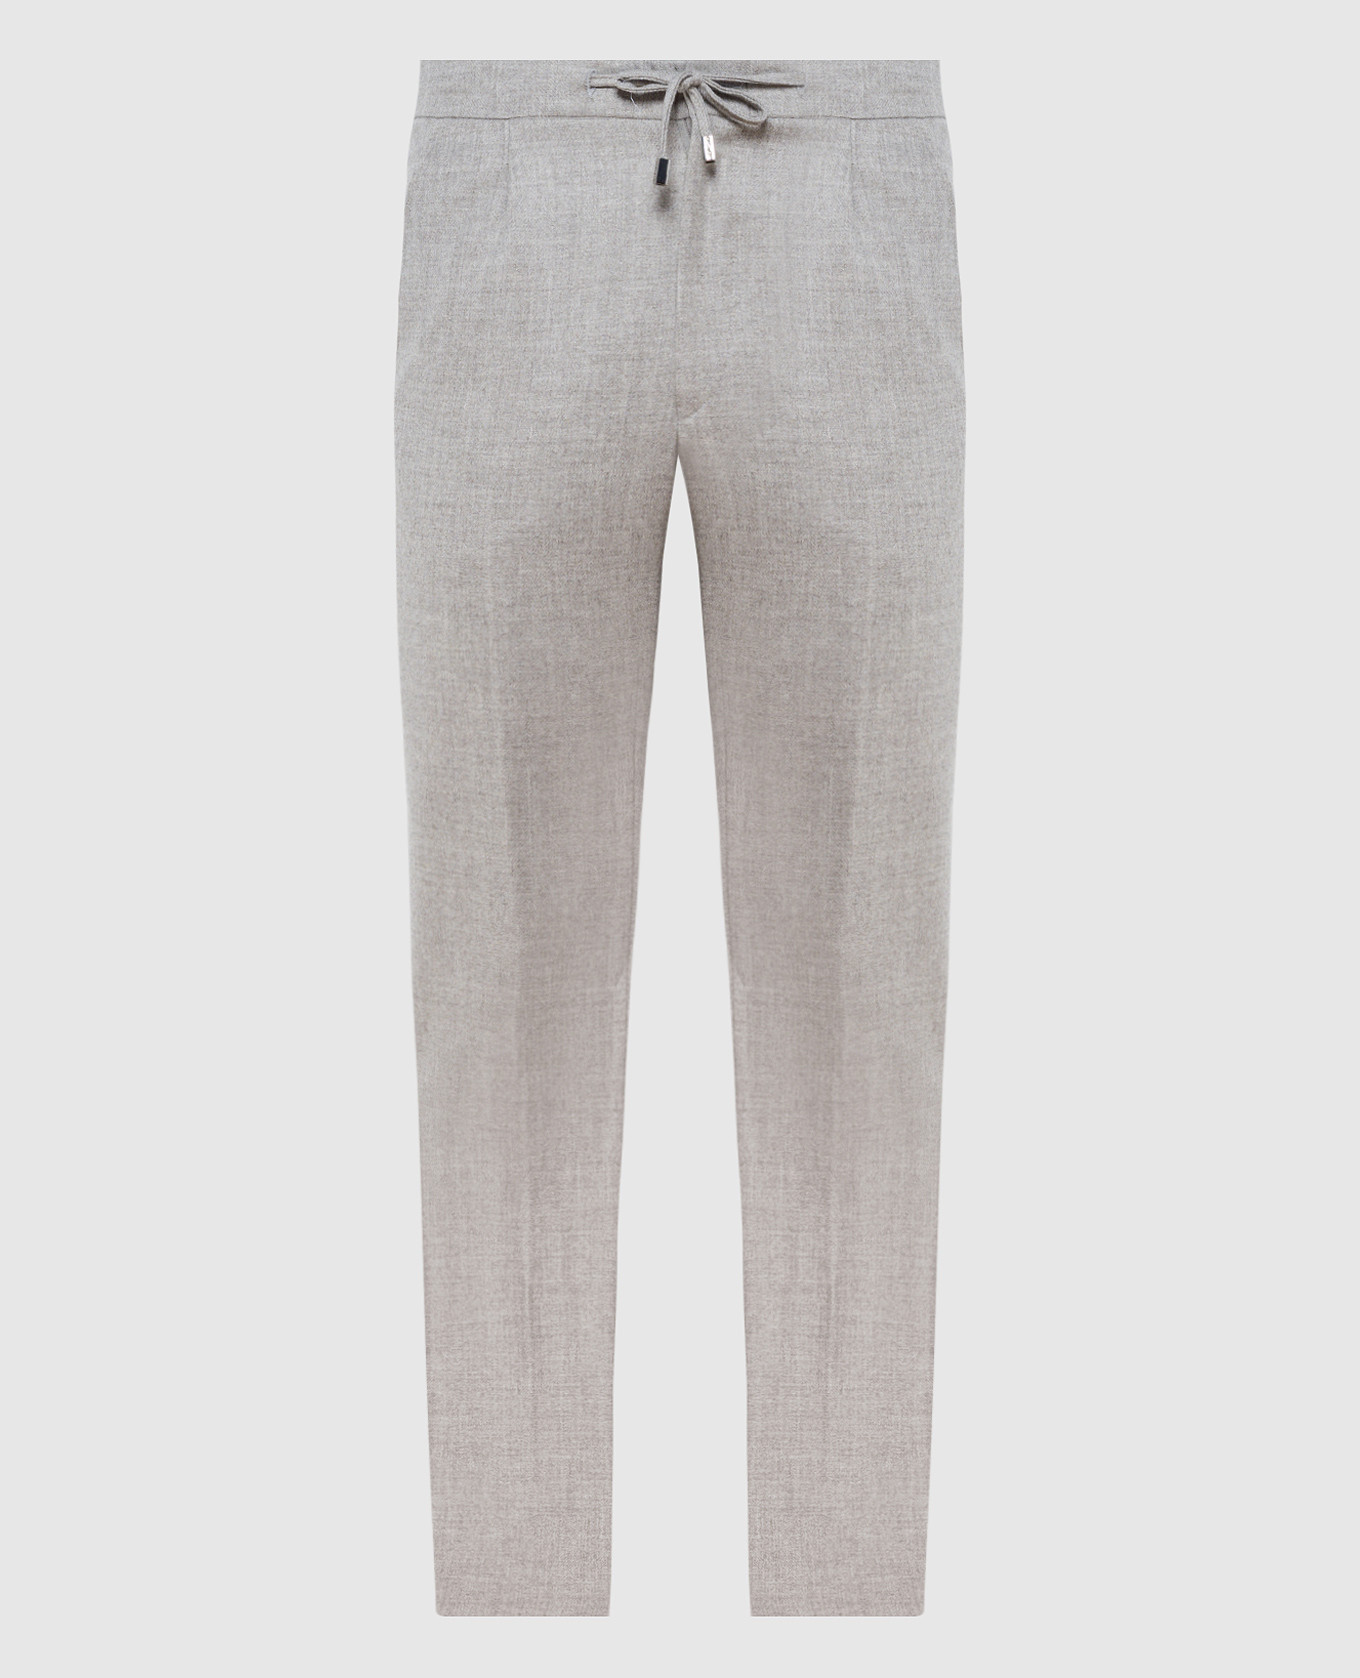 Gray tapered pants made of wool and cashmere